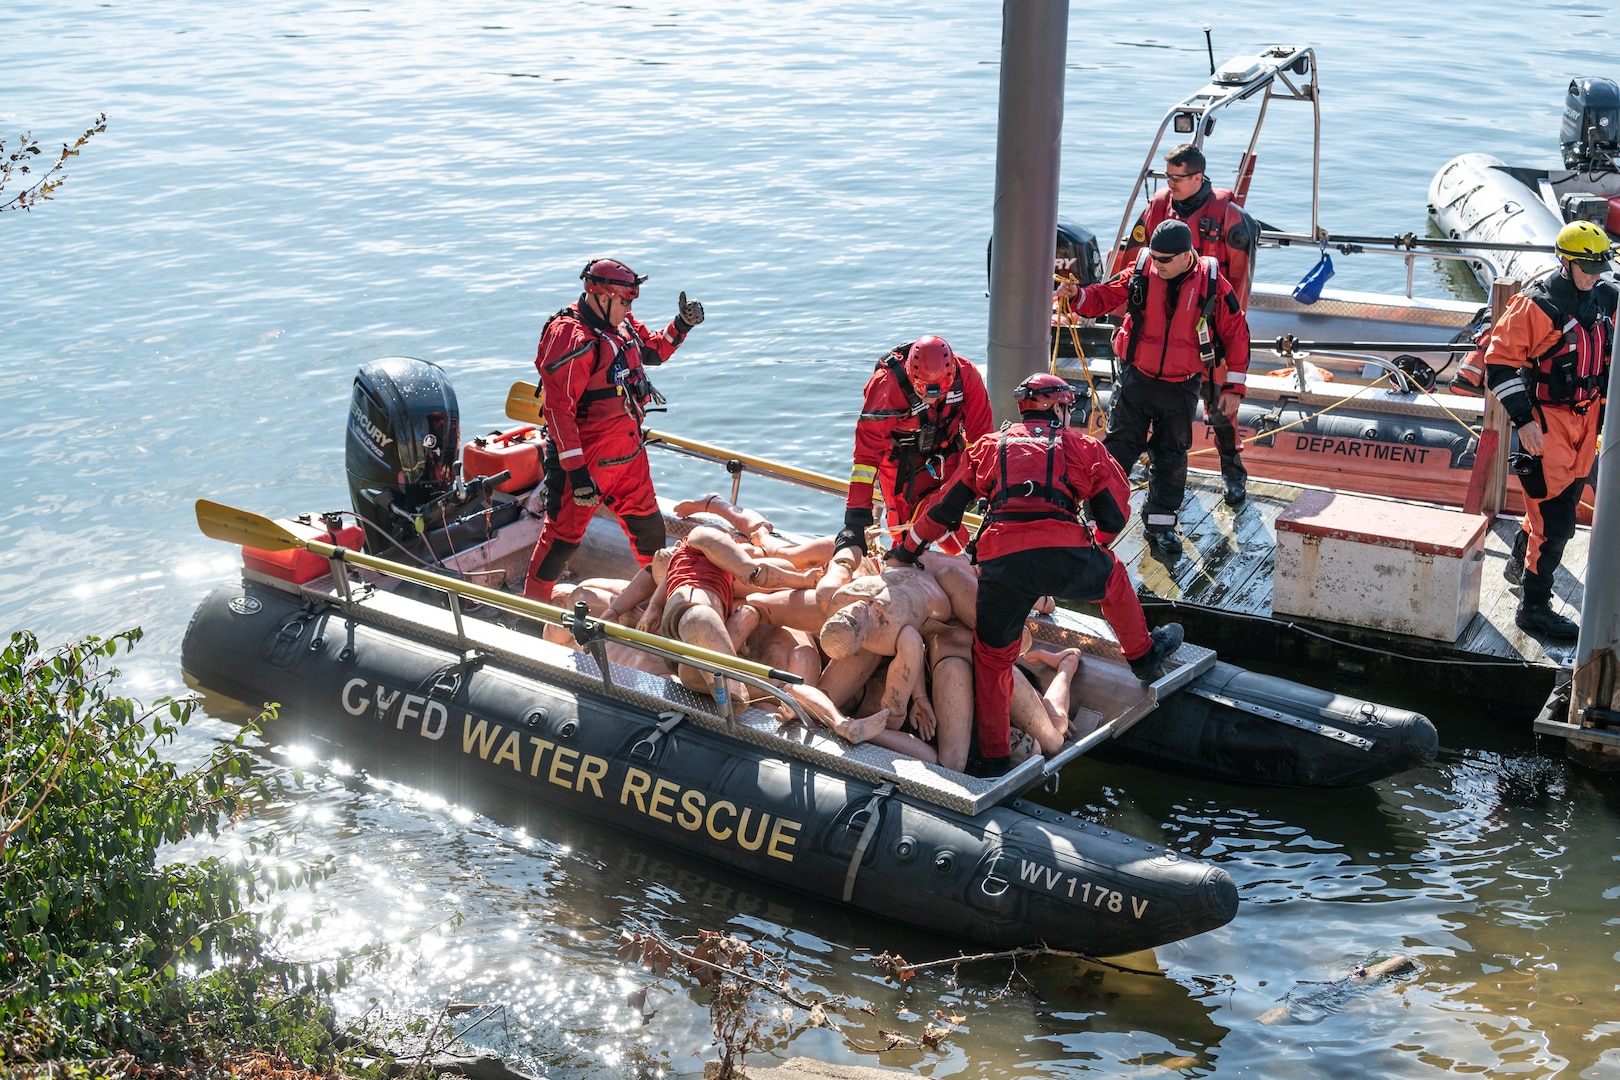 Swift water crew members in red wet suits and gear load mannequins into their boat prior to placement along the banks of the Kanawha River.